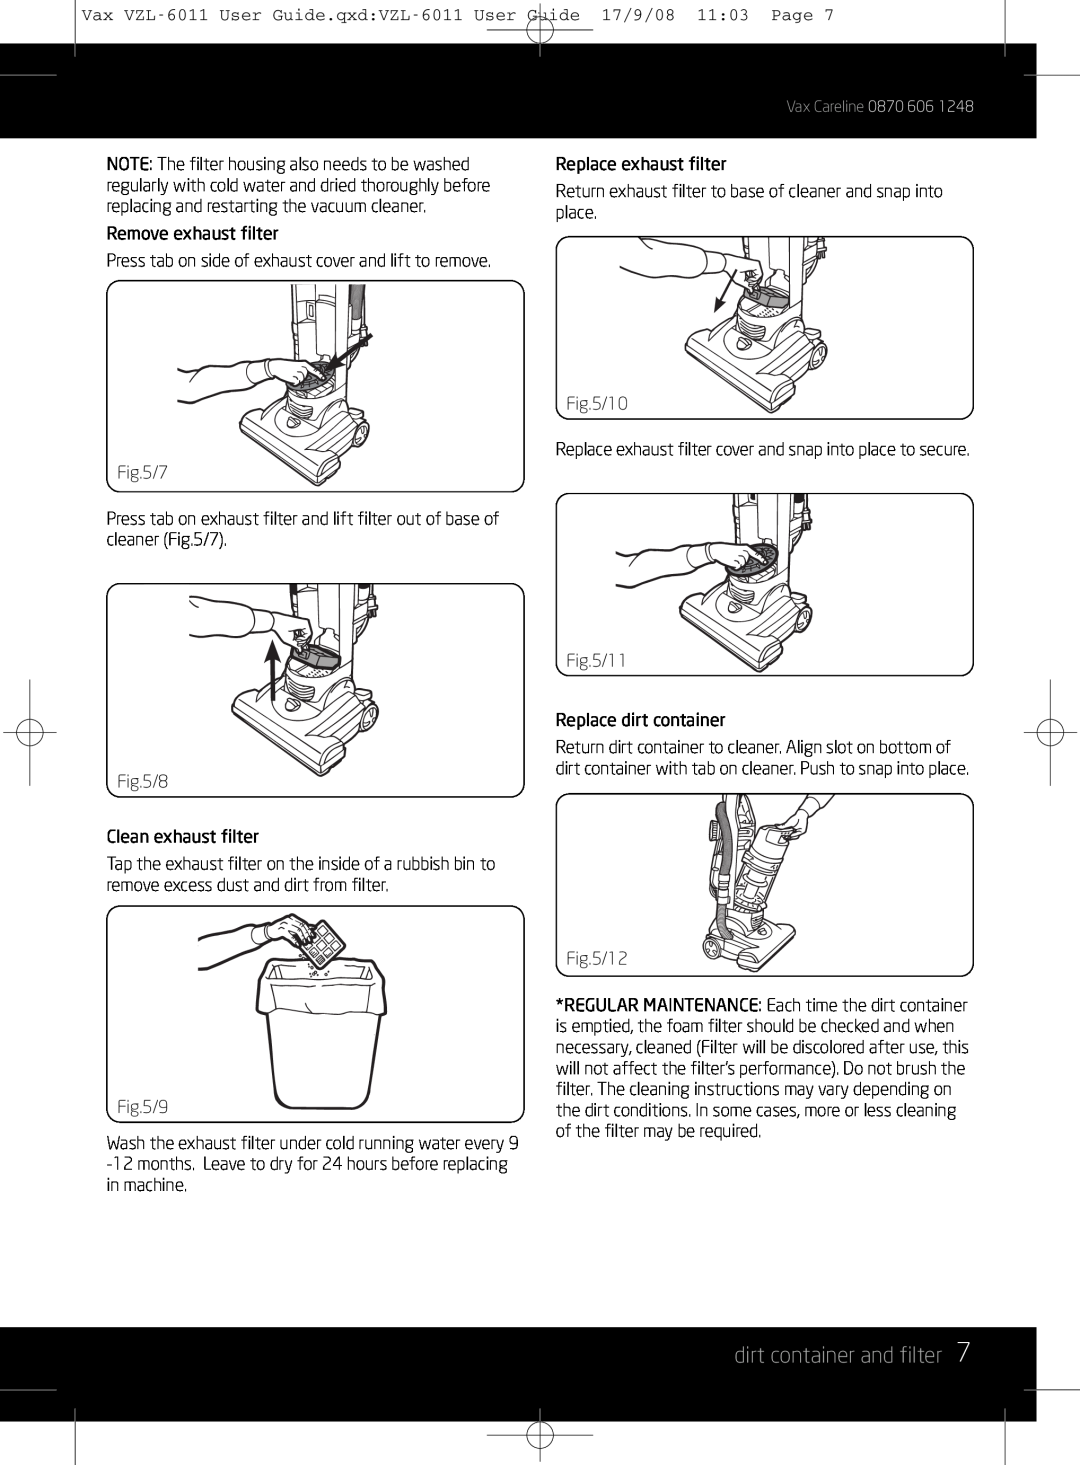 Vizio VZL-6011 instruction manual dirt container and filter 